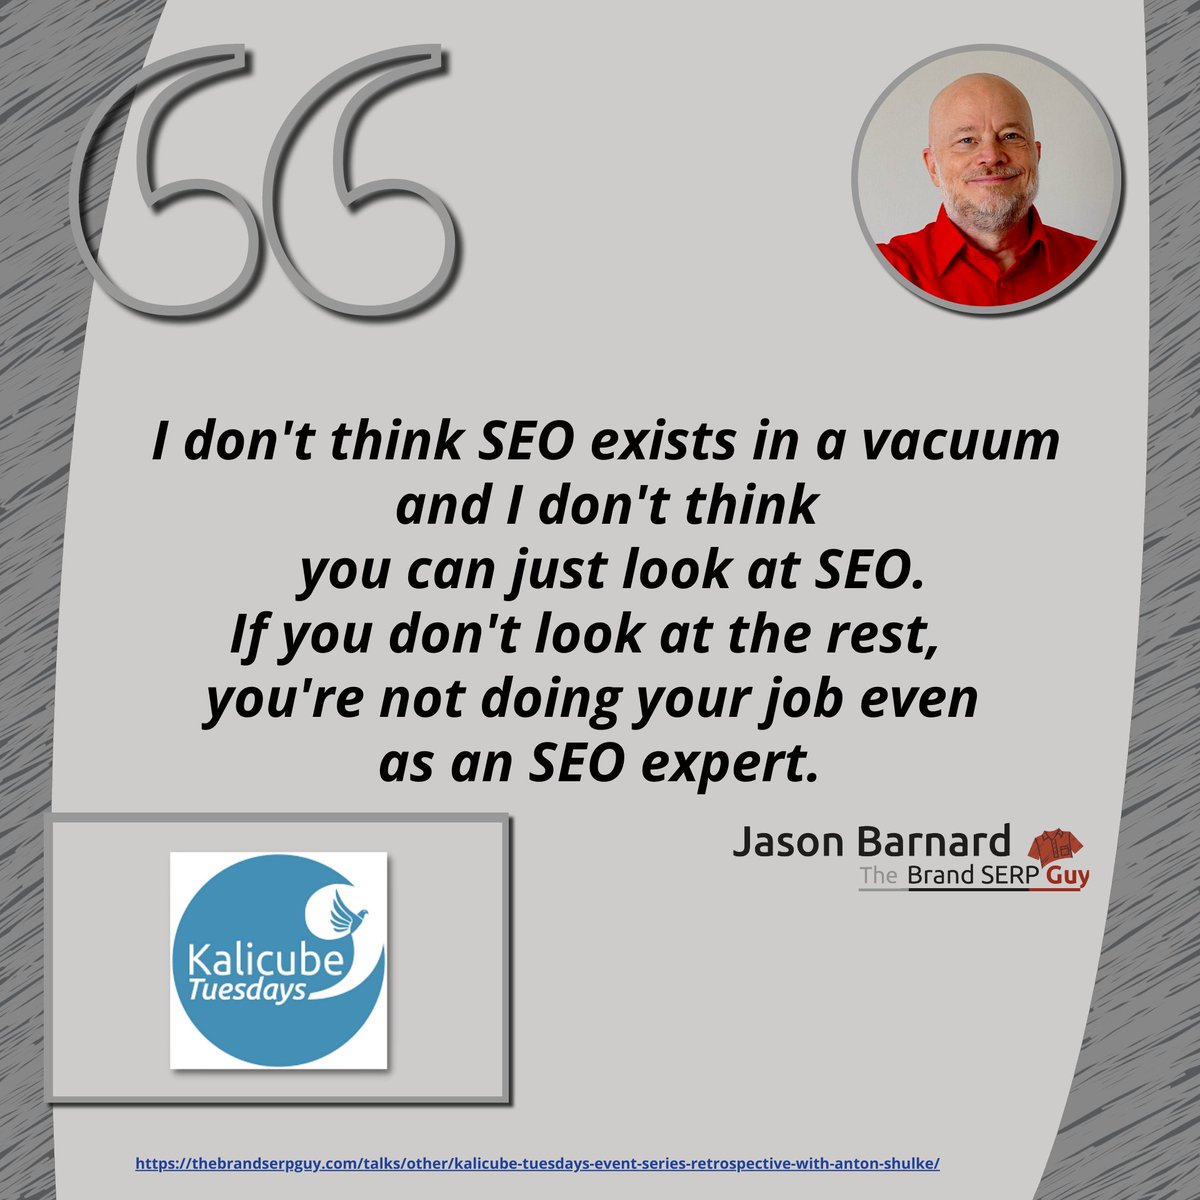 You can't just focus on SEO in isolation and expect great results. Understanding the entire digital marketing ecosystem is crucial too!

Learn from the experts in this geeky episode of #KalicubeTuesdays with @anton_shulke and@jasonmbarnard

Watch here >>
thebrandserpguy.com/talks/other/ka…